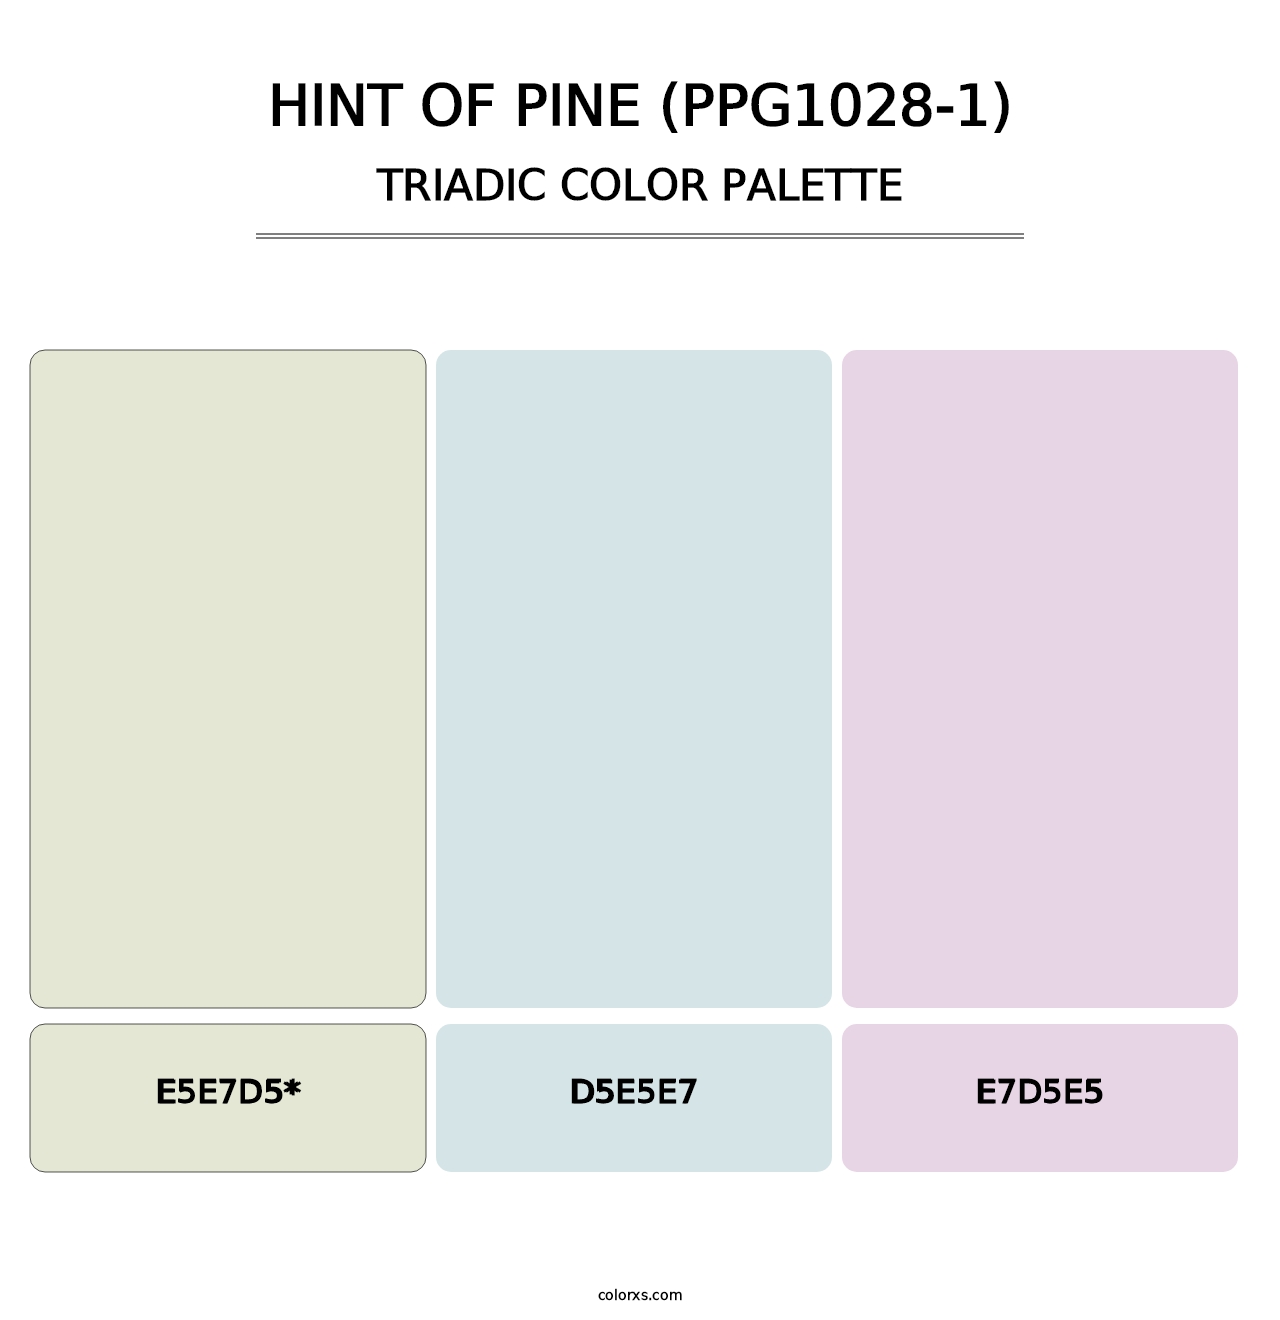 Hint Of Pine (PPG1028-1) - Triadic Color Palette